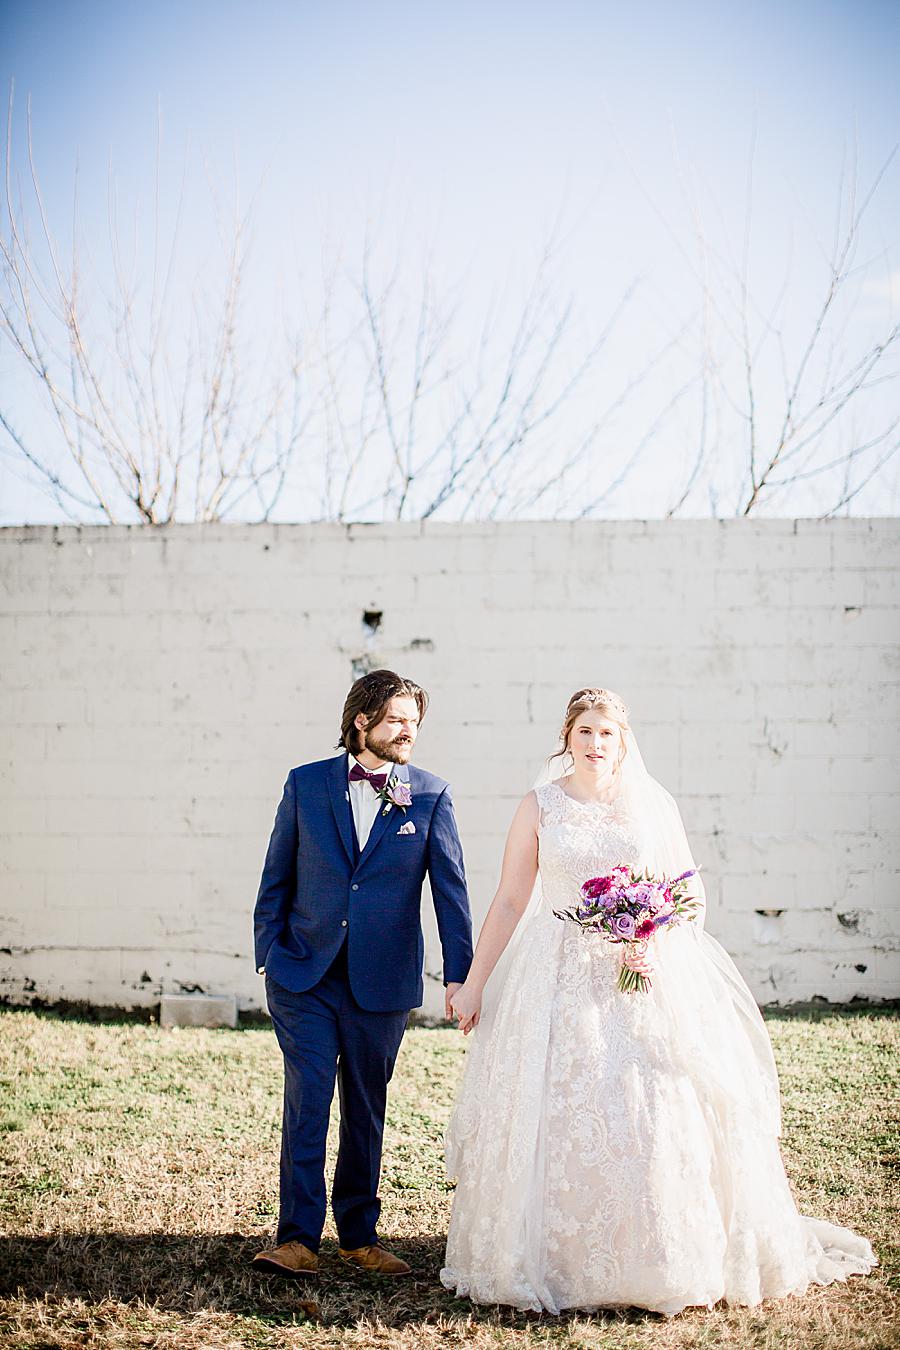 Holding hands at this Relix Theater Wedding by Knoxville Wedding Photographer, Amanda May Photos.